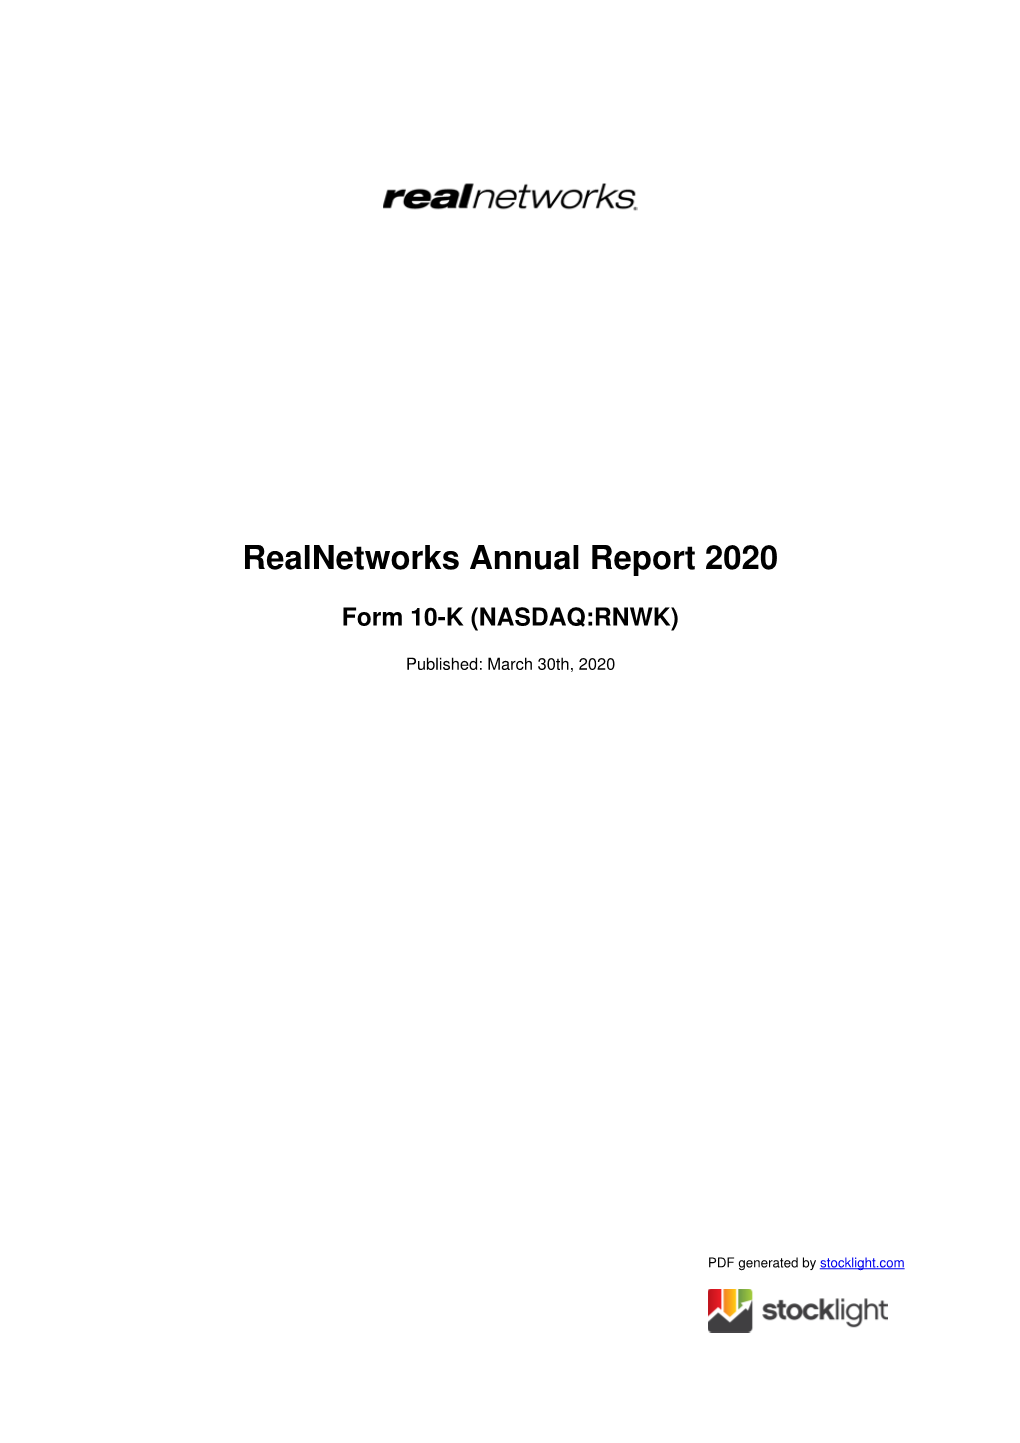 Realnetworks Annual Report 2020